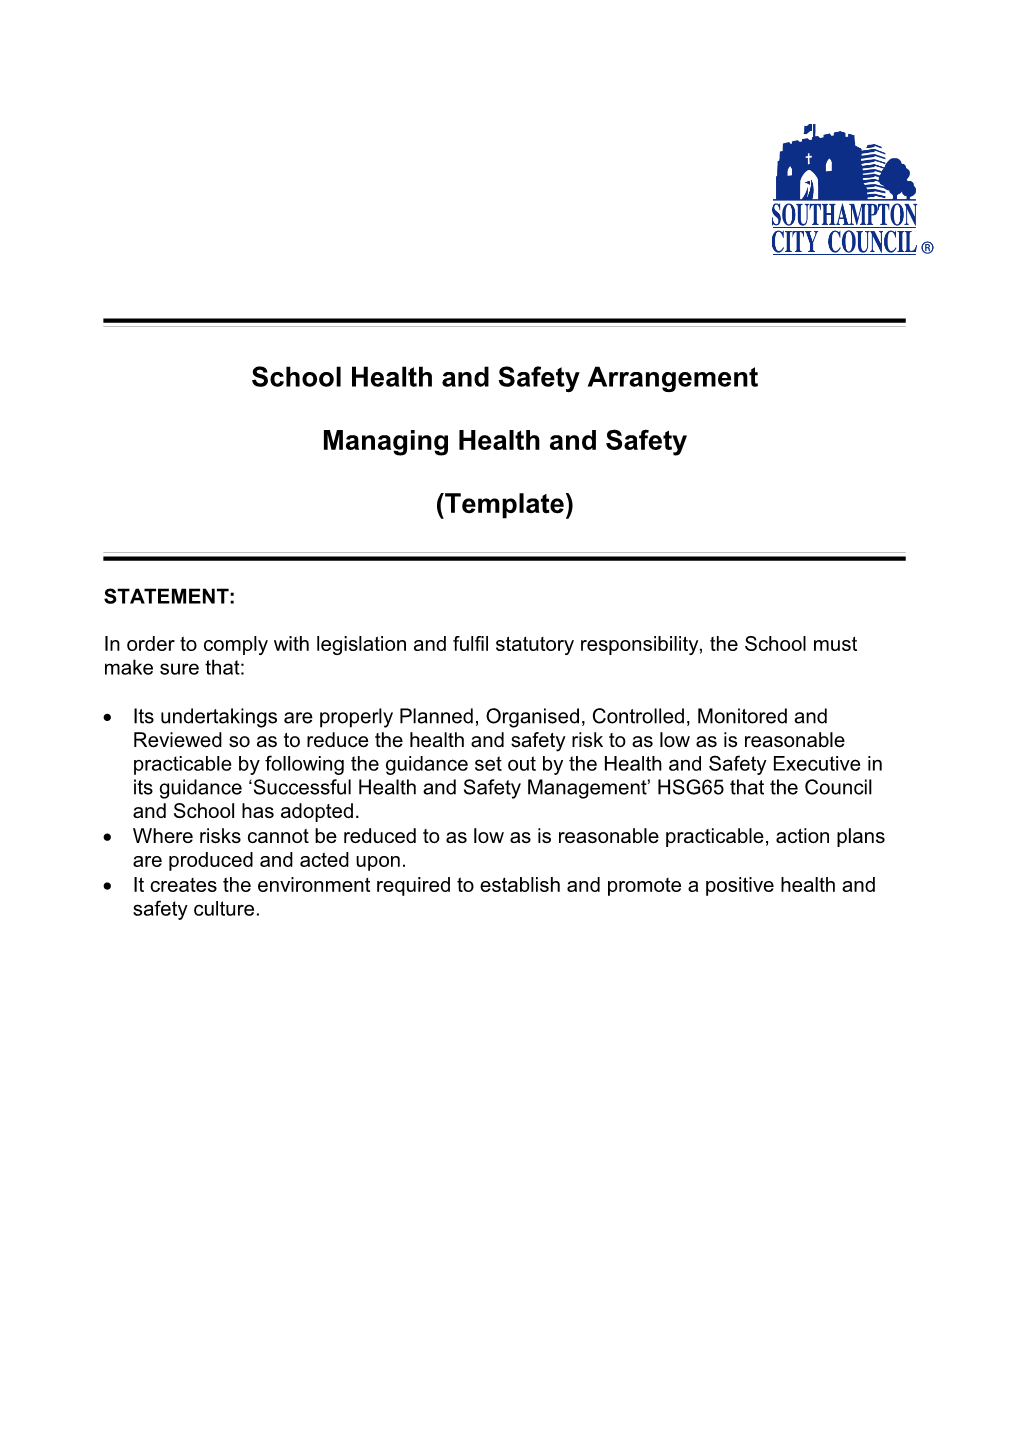 Council Health and Safety Policy Statement